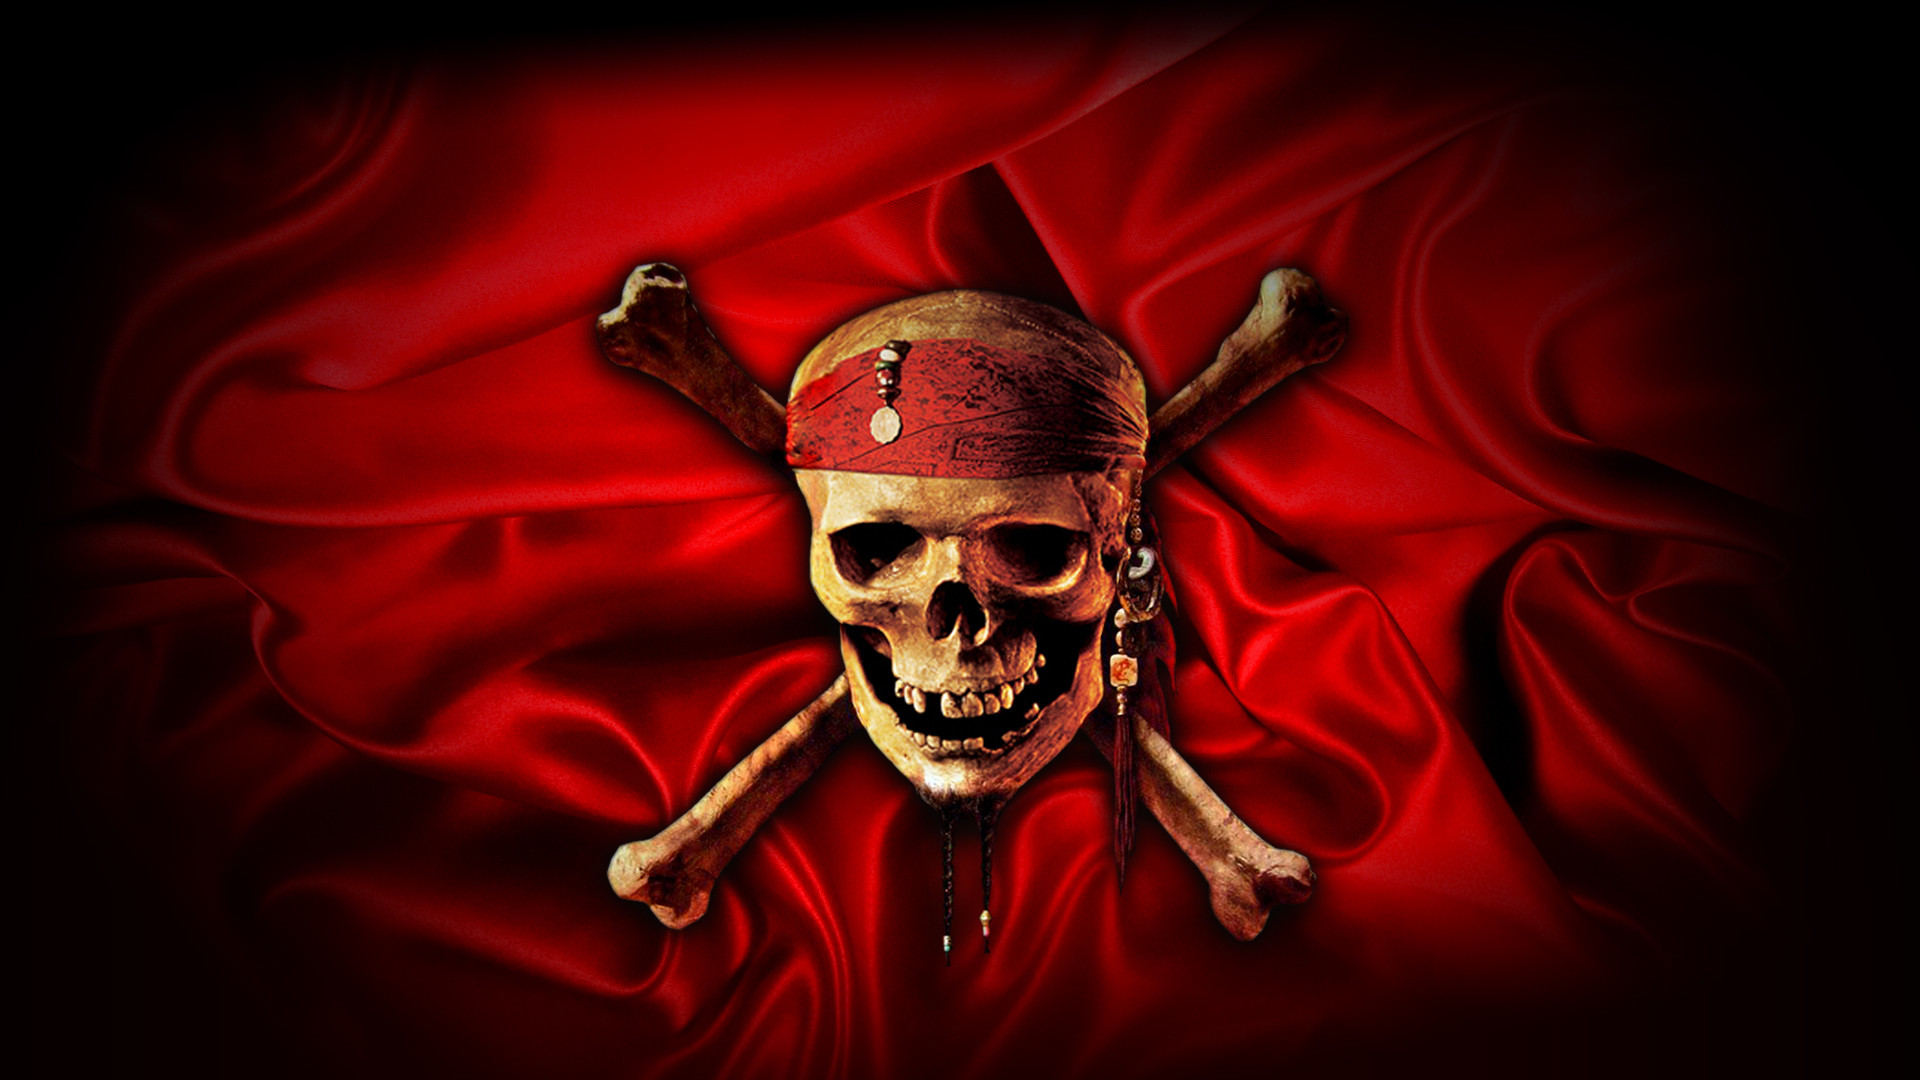 Movie Pirates Of The Caribbean At Worlds End Skull Crossbones Wallpaper